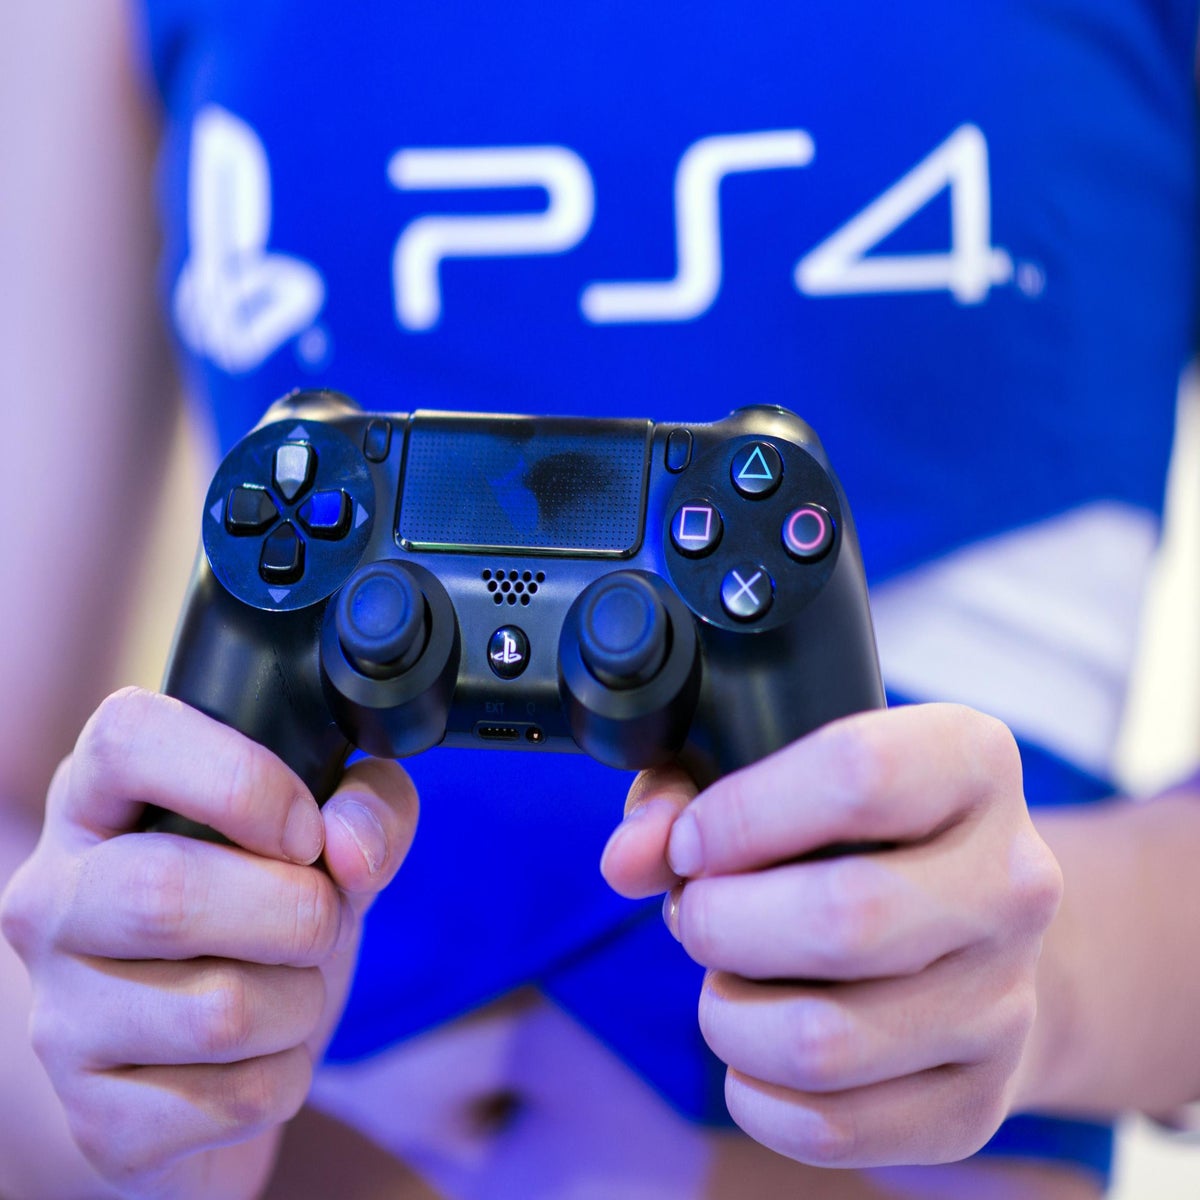 How ISIS Terrorists May Have Used PlayStation 4 To Discuss And